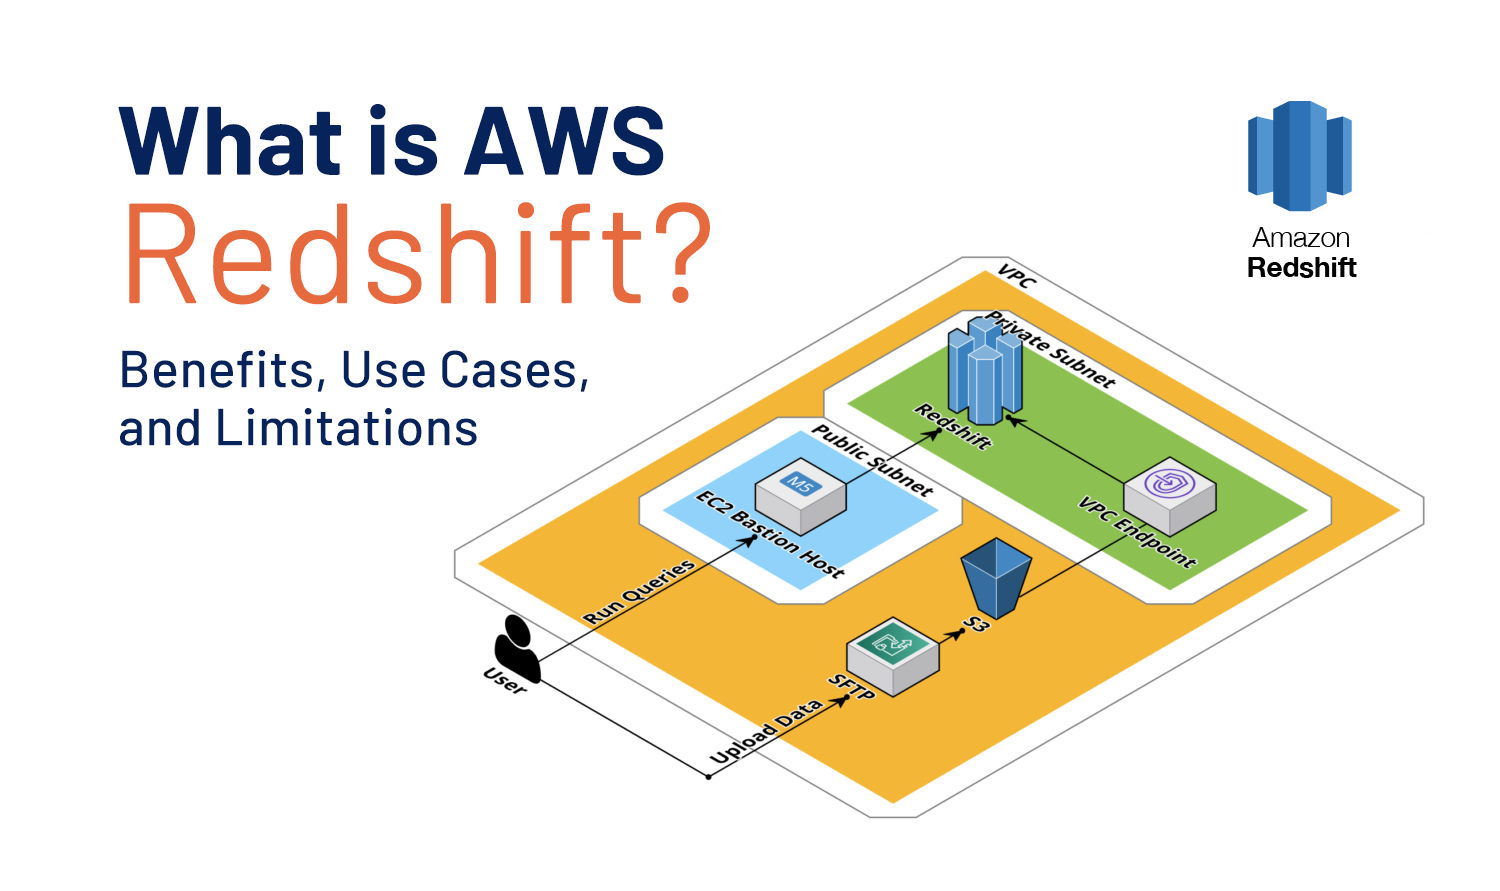 What is AWS Redshift